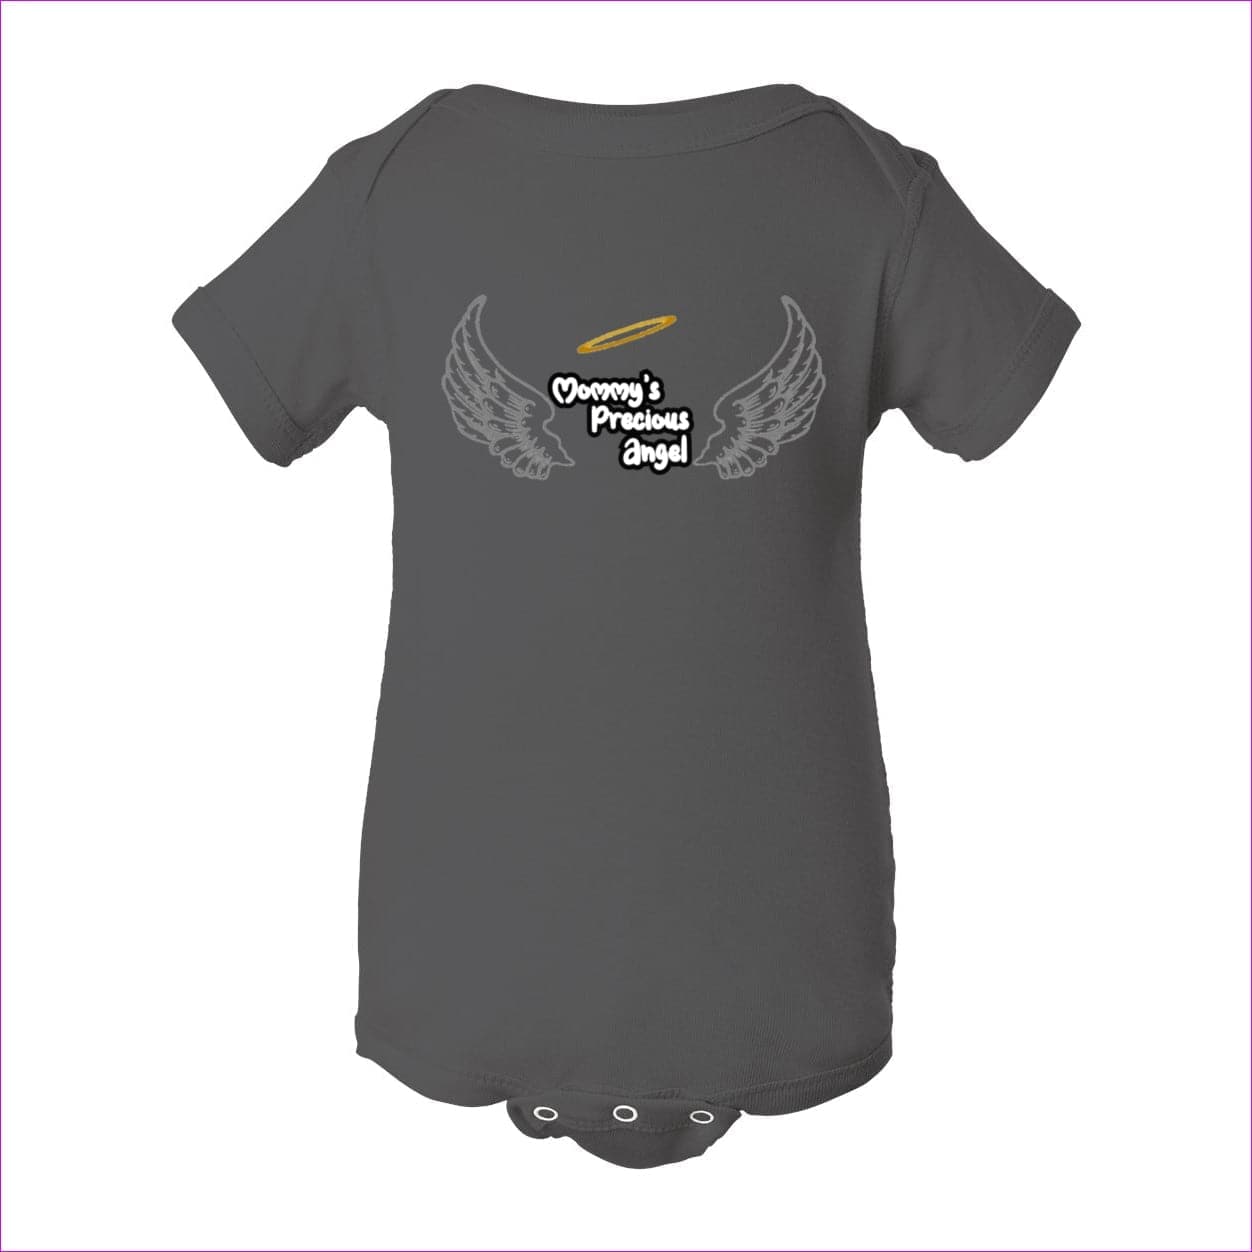 Charcoal Mommy's Precious Angel Infant Bodysuit - infant onesie at TFC&H Co.